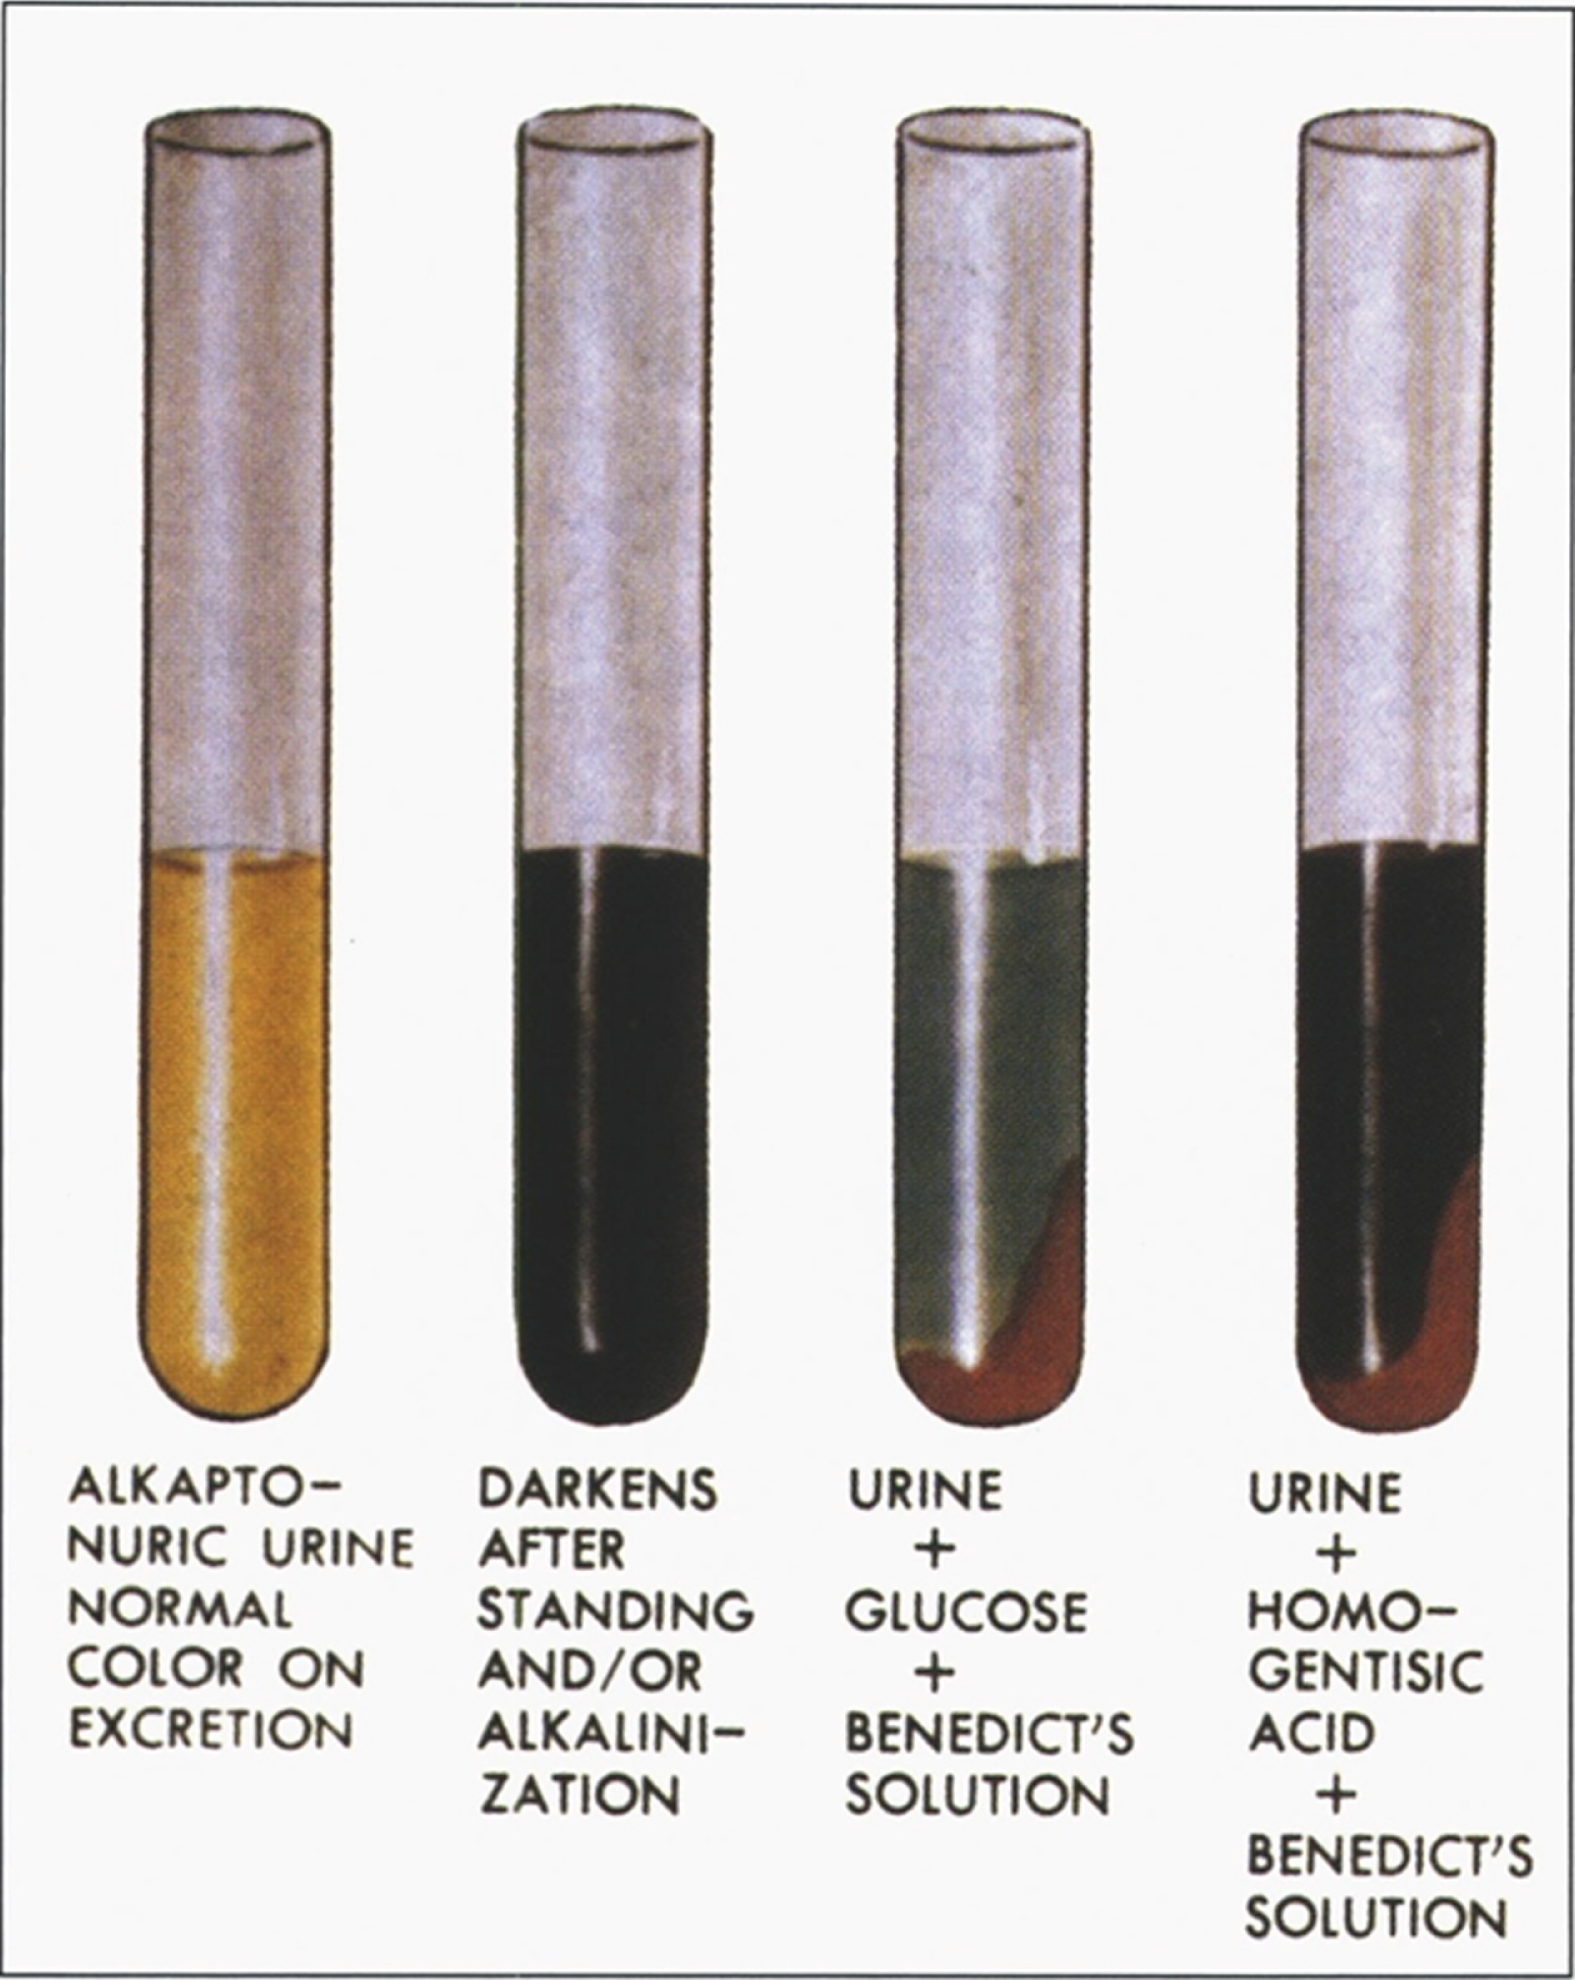 Alkaptonuria- The reaction of urine to oxidation, alkali, and Benedict’s solution. (Figure 13 in the first book).